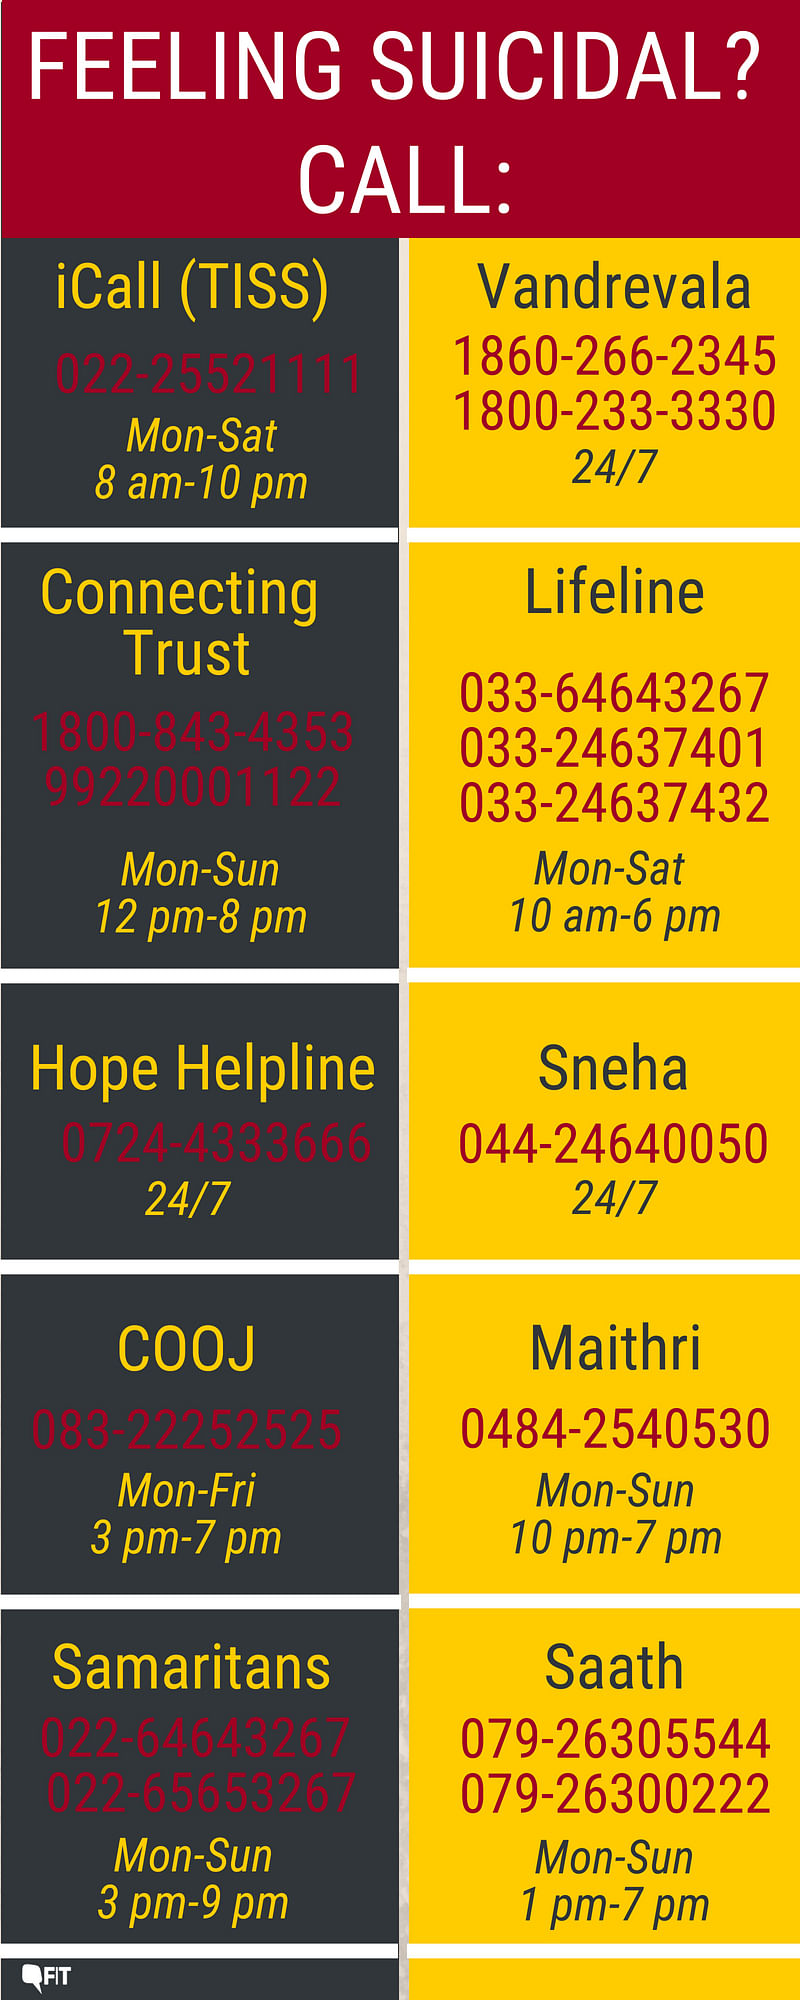 Another Student Suicide: A List of Prevention Helplines To Call 